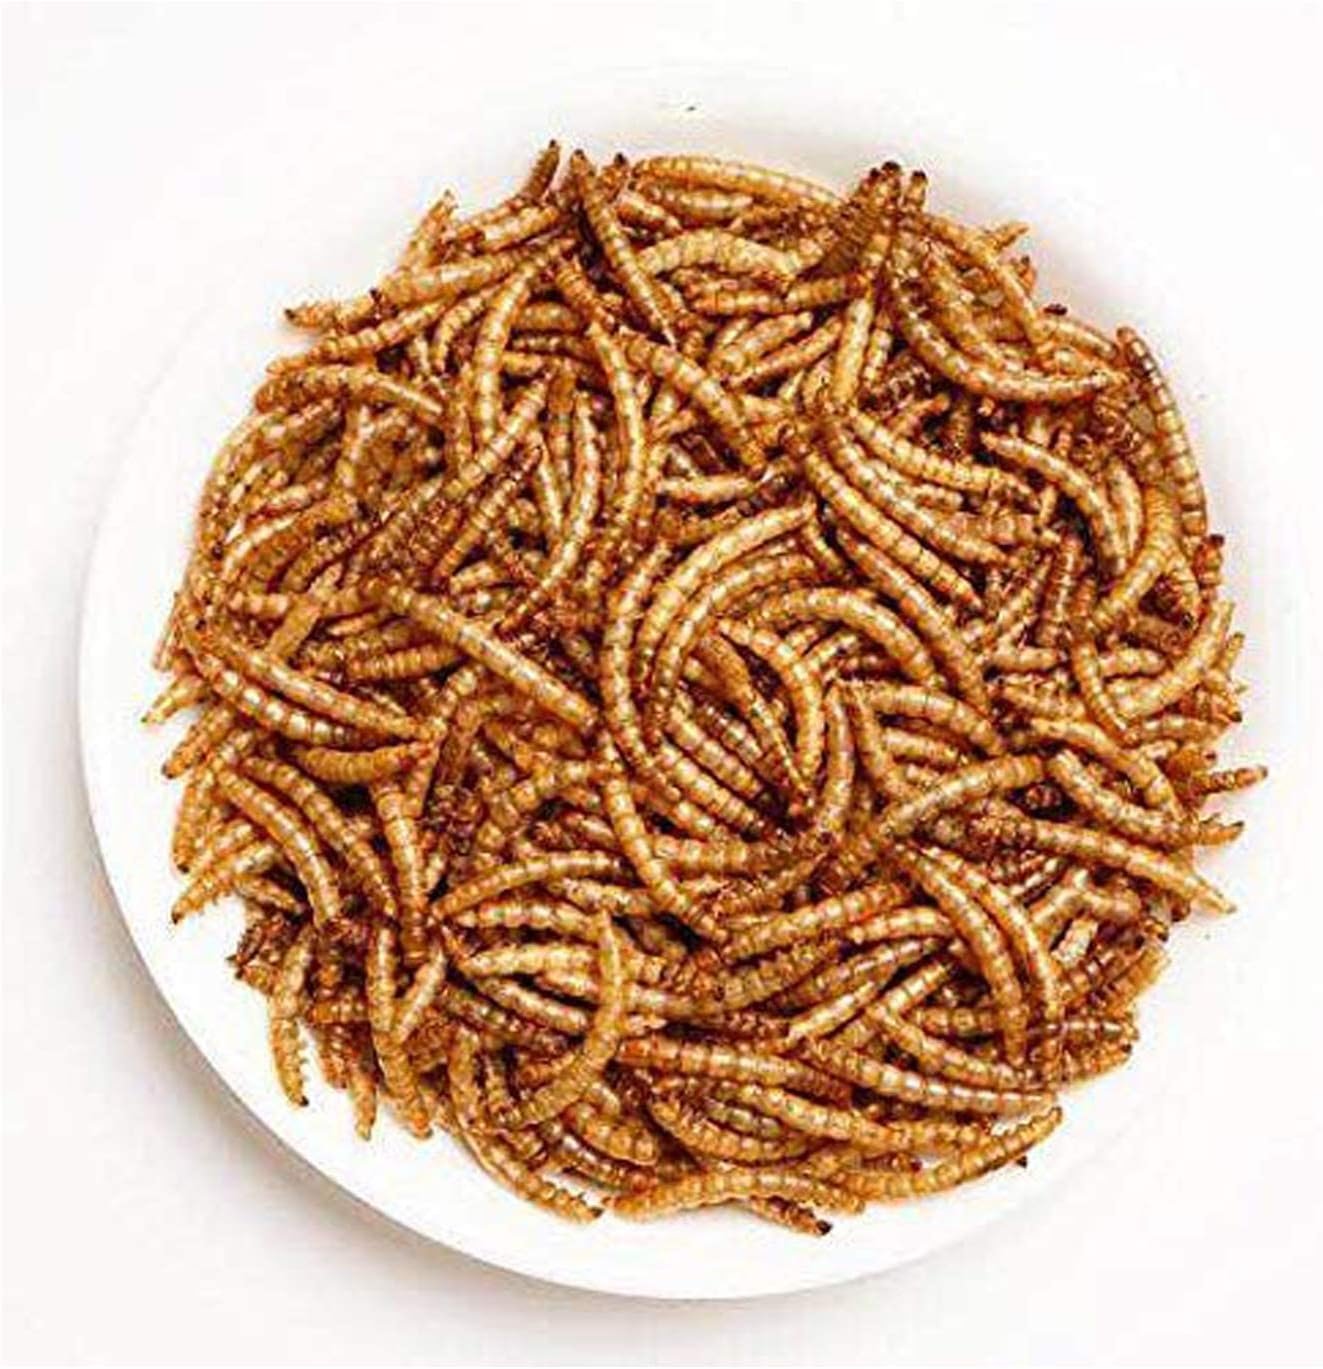 Amzey Appetizing Mealworms 5 LBS- 100% Non-GMO Dried Mealworms - Large Meal Worms - High Protein Treats- Perfect Mealworm for Chickens, Ducks, Turtles, Blue Birds, Lizards - Bag of Mealworms 5 LBS